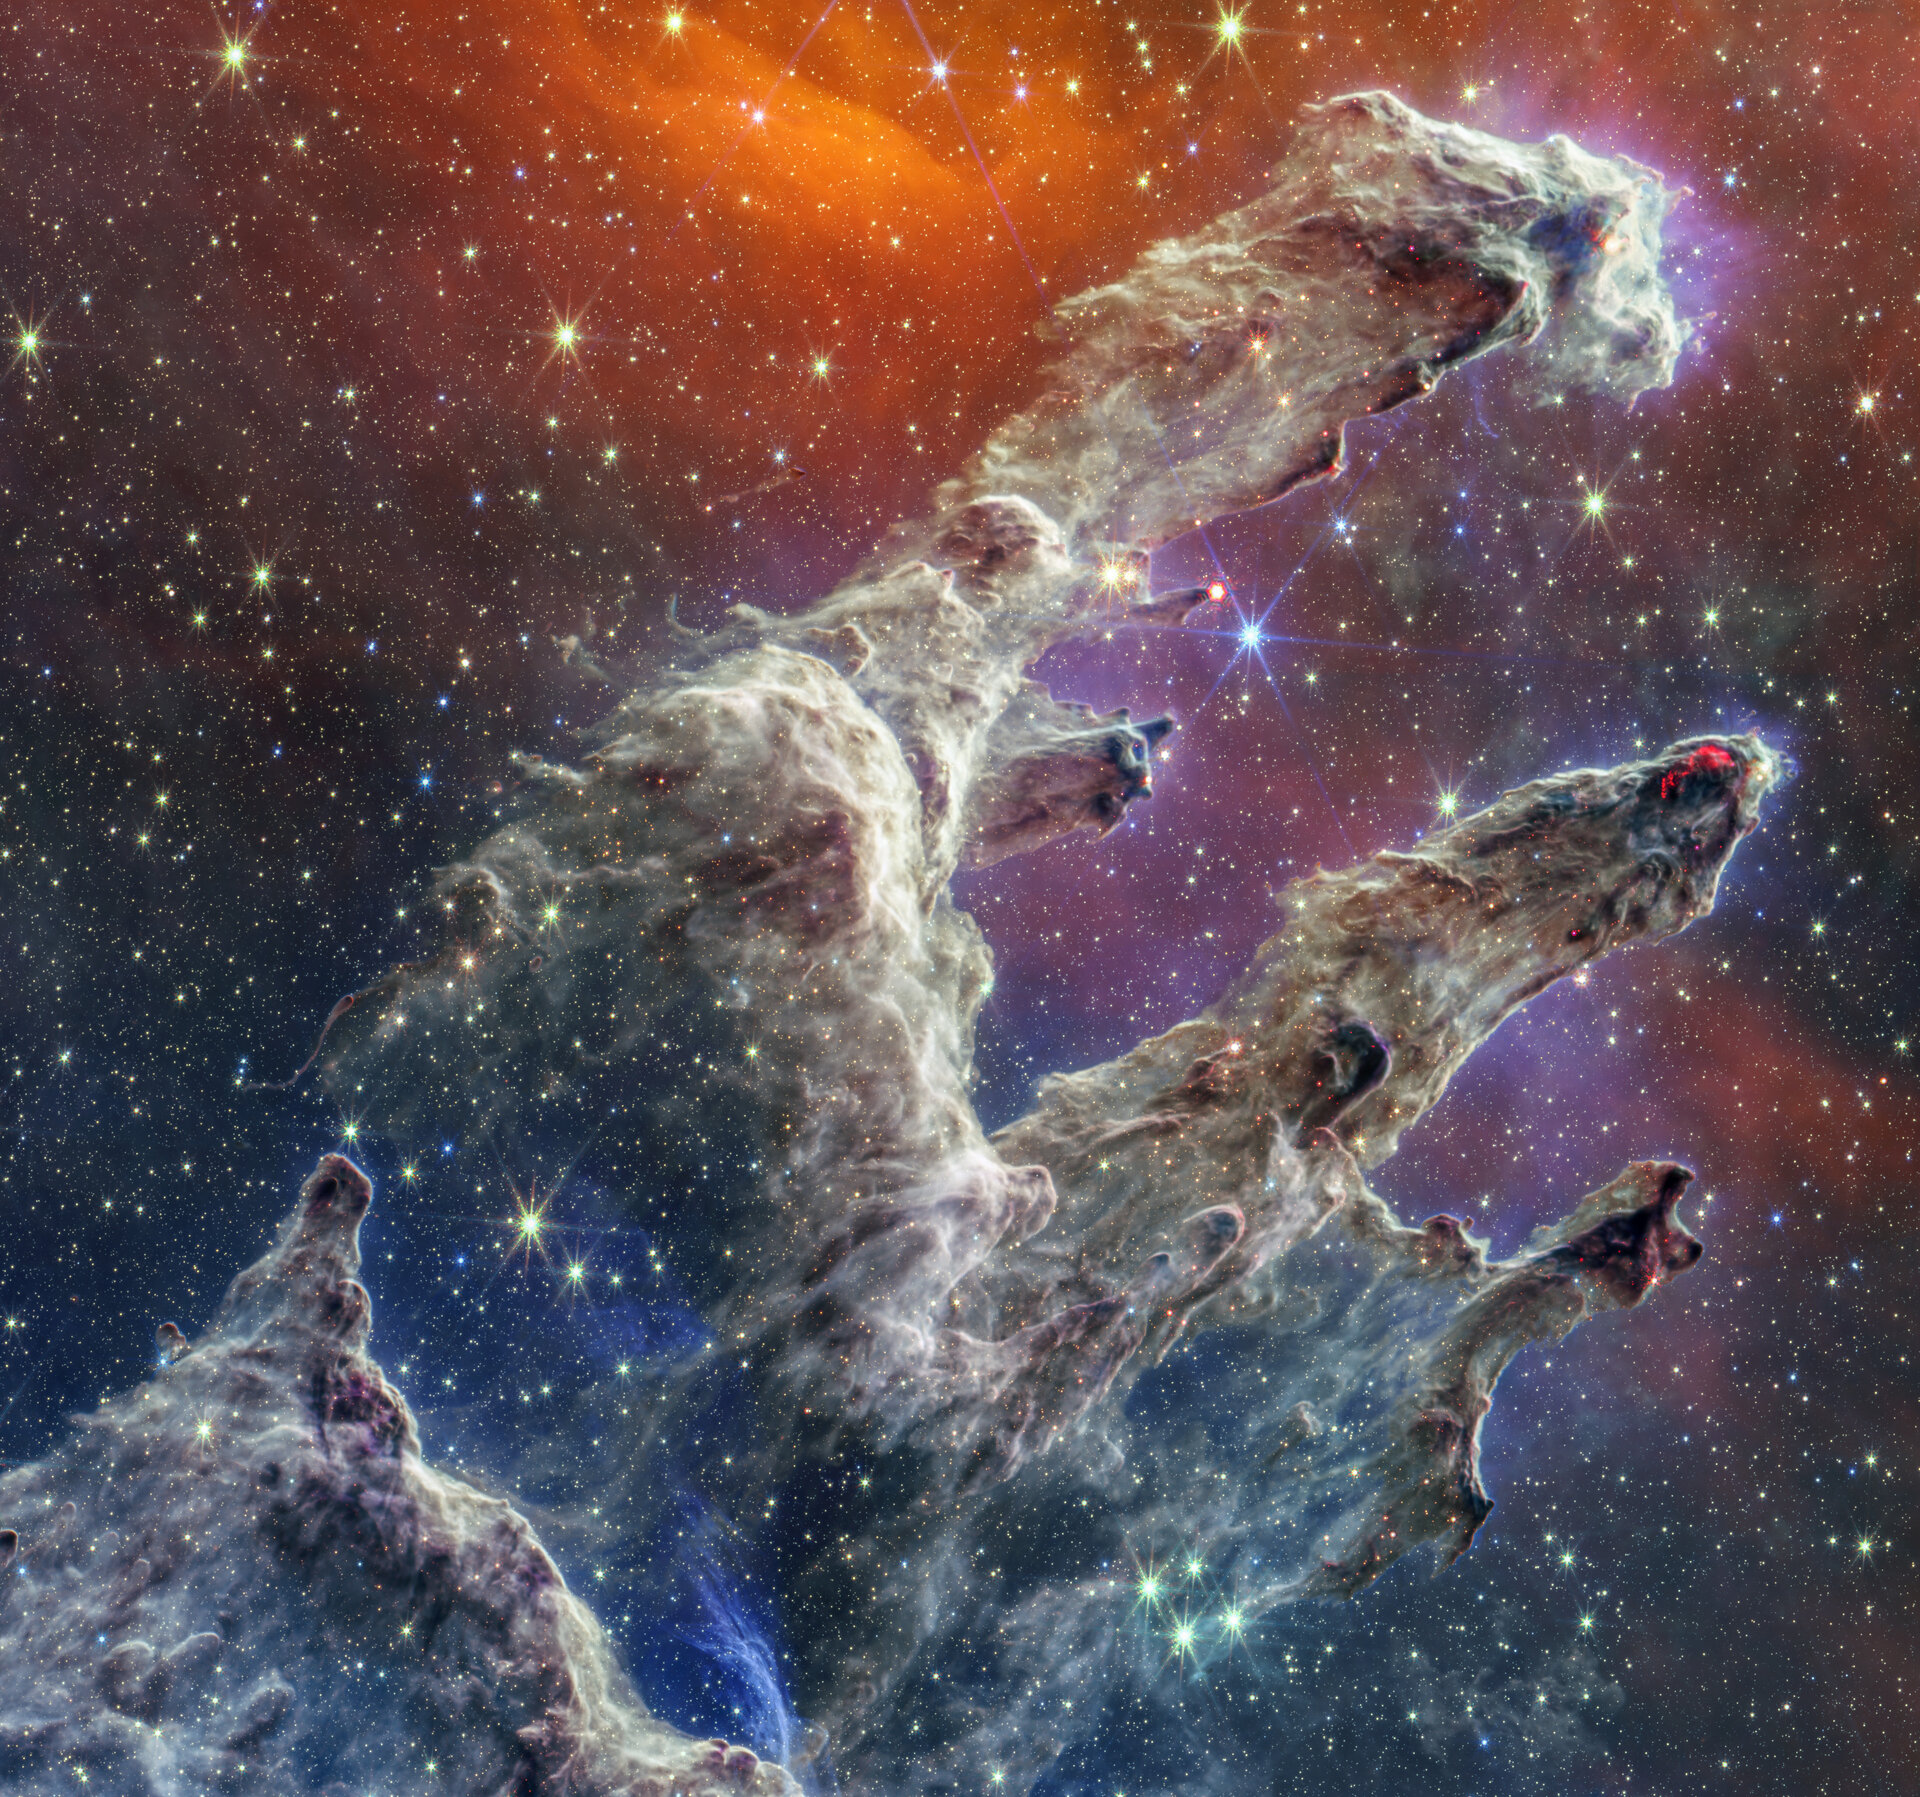 Webb's most beautiful image yet of the Pillars of Creation